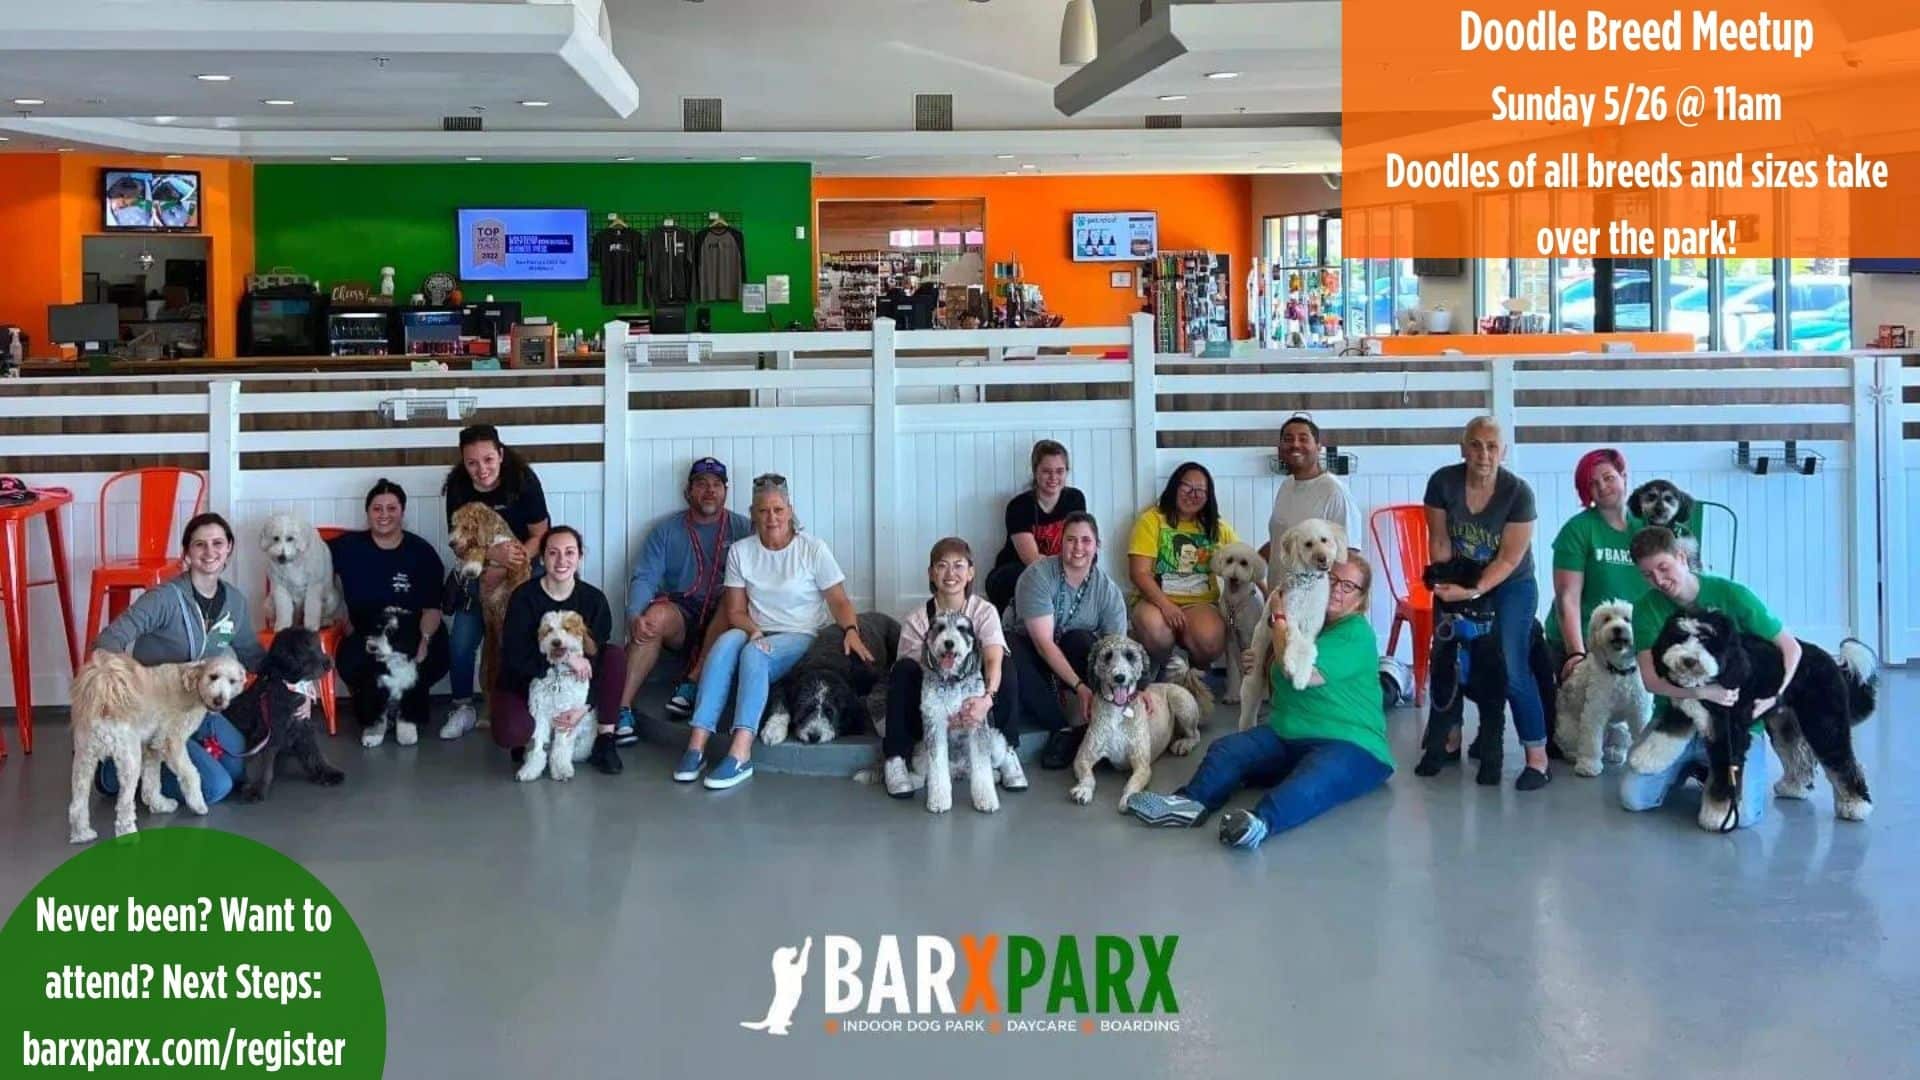 Doodle breed meetup 1